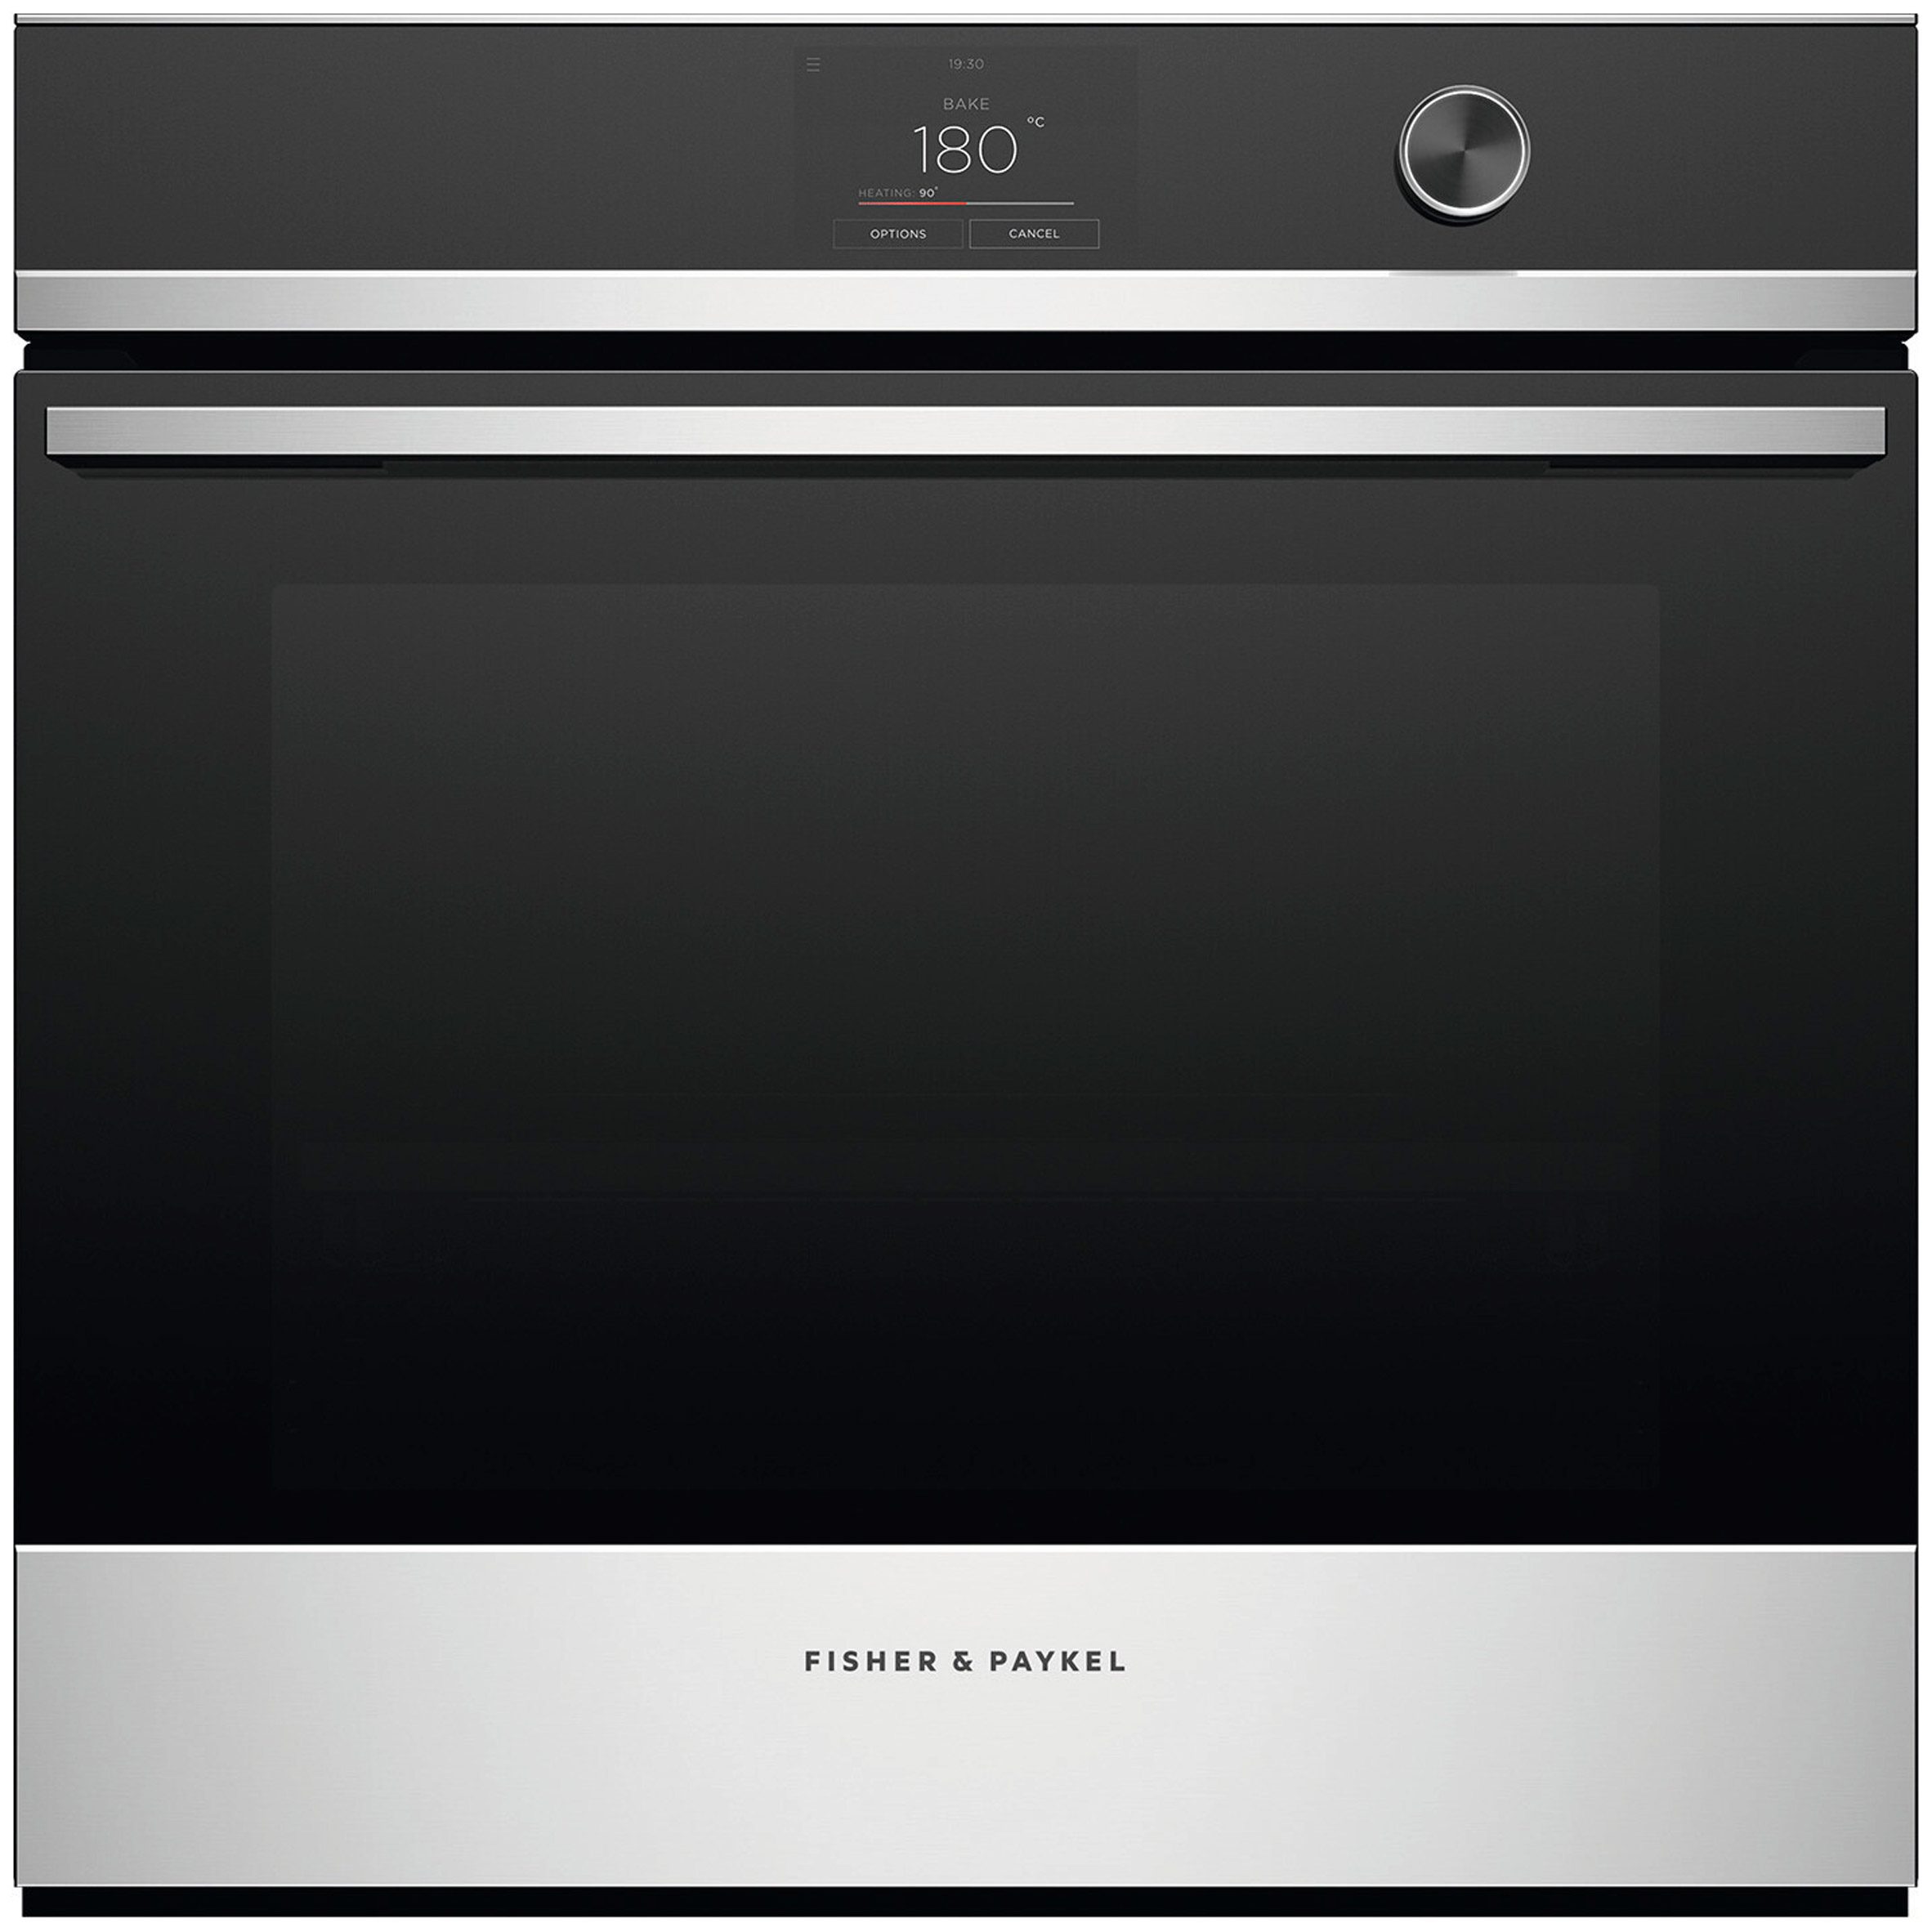 A black and silver touch screen oven